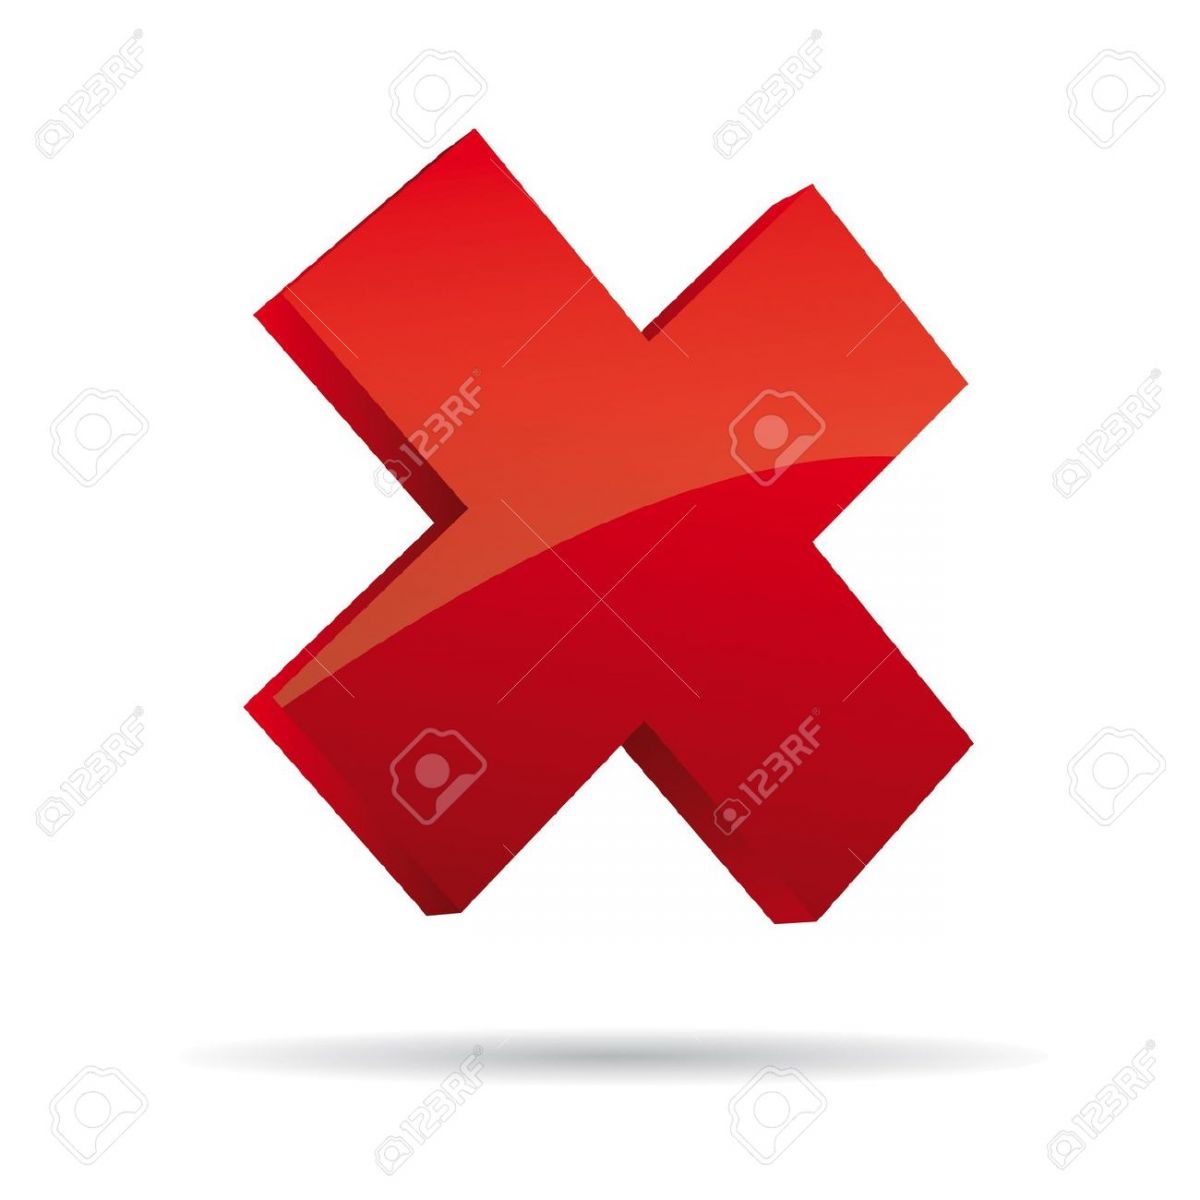 12409930-3D-Vector-red-X-cross-sign-icon-Stock-Photo.jpg (62 KB)